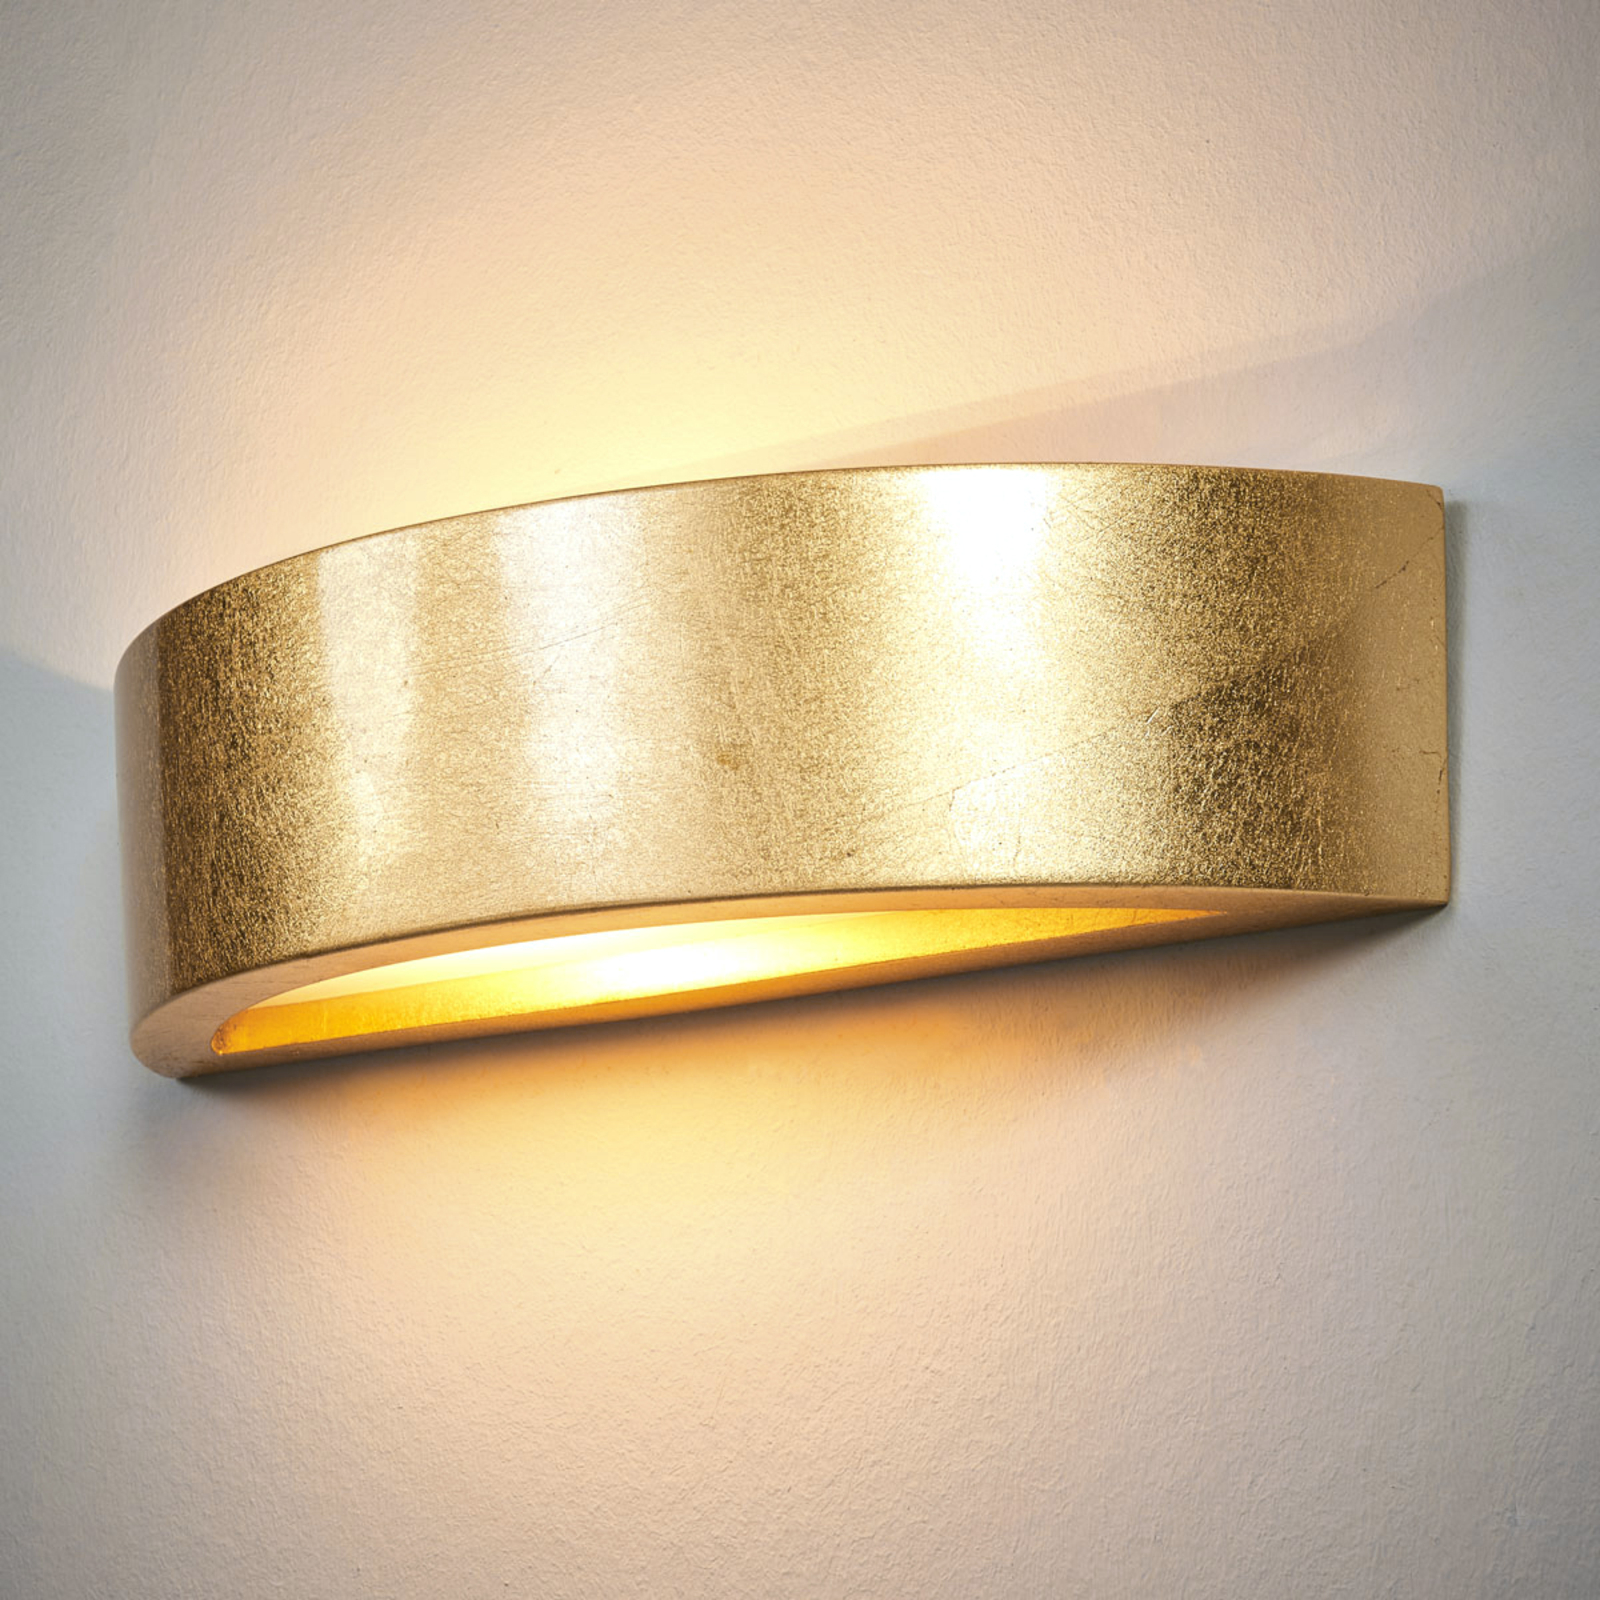 Jasin - wall light with a golden surface